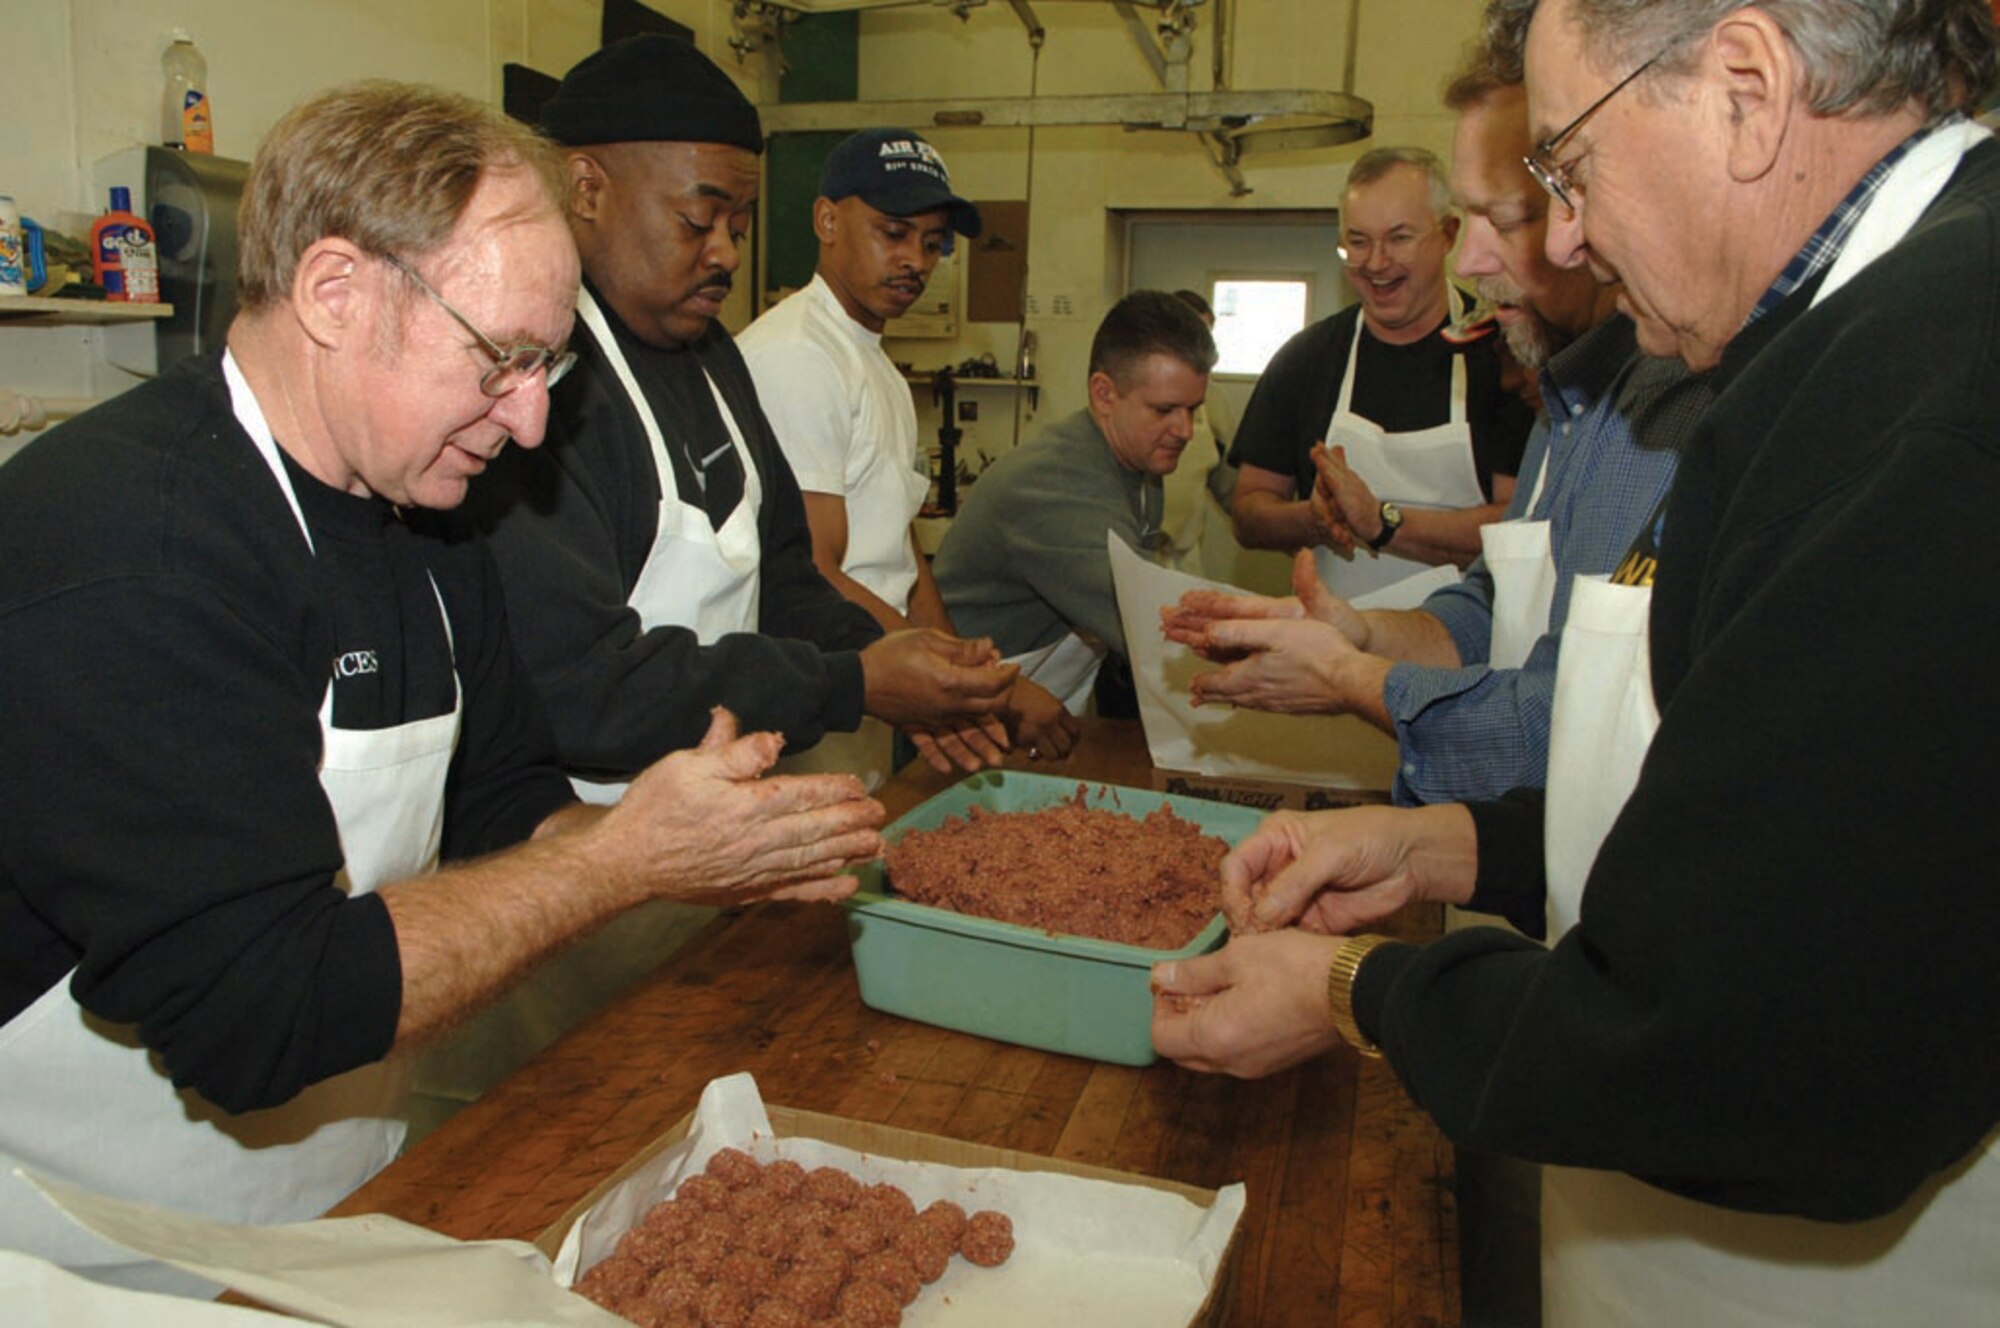 MINOT AIR FORCE BASE, N.D. -- A group of Team Minot members roll meatballs Jan. 20, 2006 at Bloms’ Locker and Processing Plant in Minot, N.D., during the meat-cutting for the 41st annual Sportsmen’s Feed, an annual gathering of food (various types of game like duck, pheasant and venison), friendship and football-watching. The 42nd annual Sportsmen’s Feed starts at noon Jan. 21, 2007 at the Jimmy Doolittle Center. Price of a ticket is $30 and, in addition to the purchaser, each ticket sold entitles a selected Airman to free admission. To purchase tickets, contact unit first sergeants or group superintendents. (U.S. Air Force photo by Staff Sgt. Jocelyn Rich)